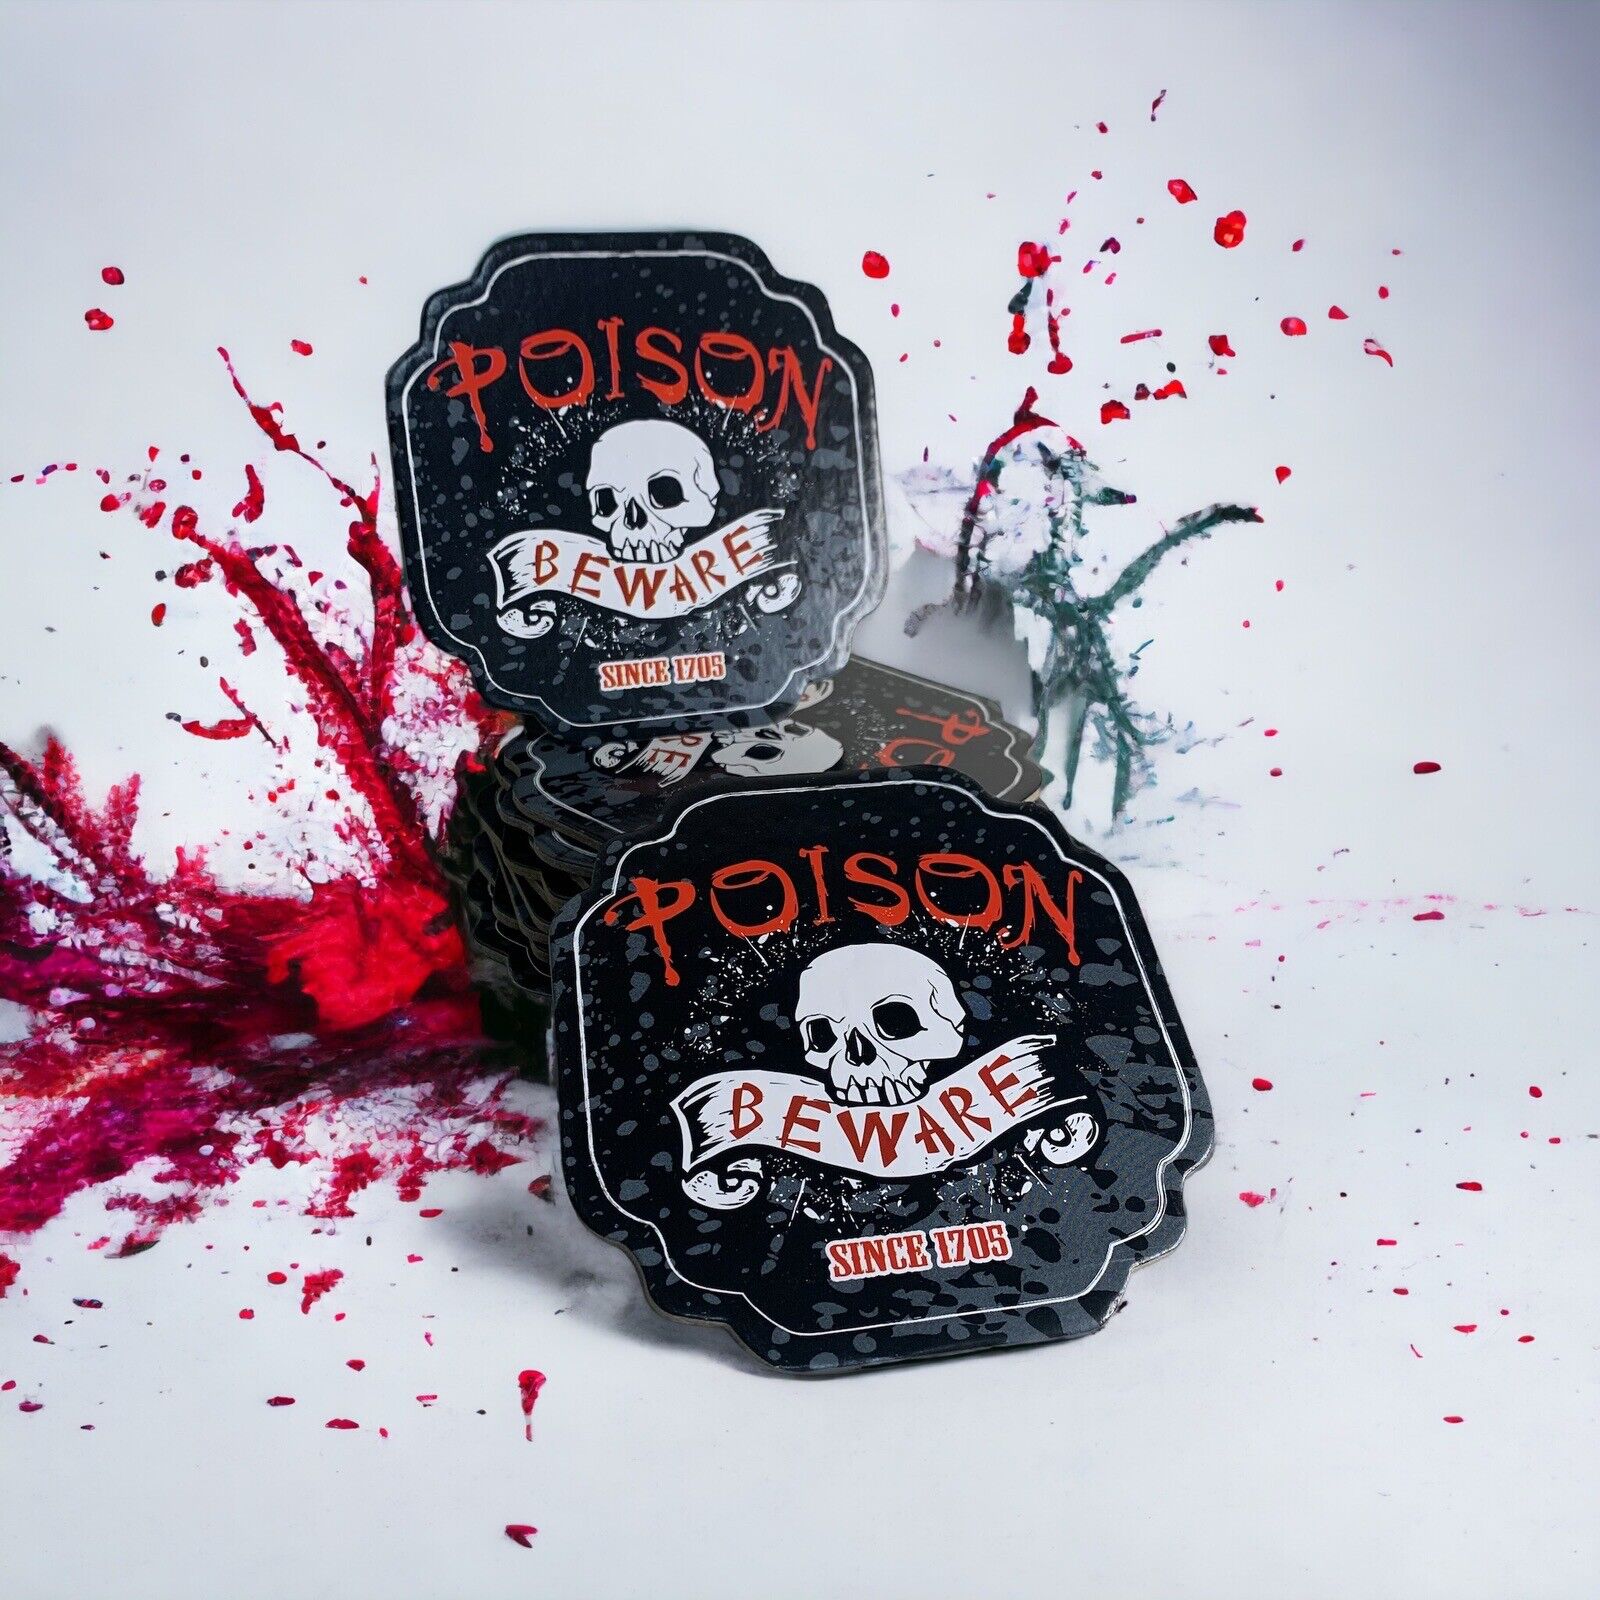 Set Of 12 Beer Drink Coasters “Poison Beware Since 1705” Halloween Party Skull 